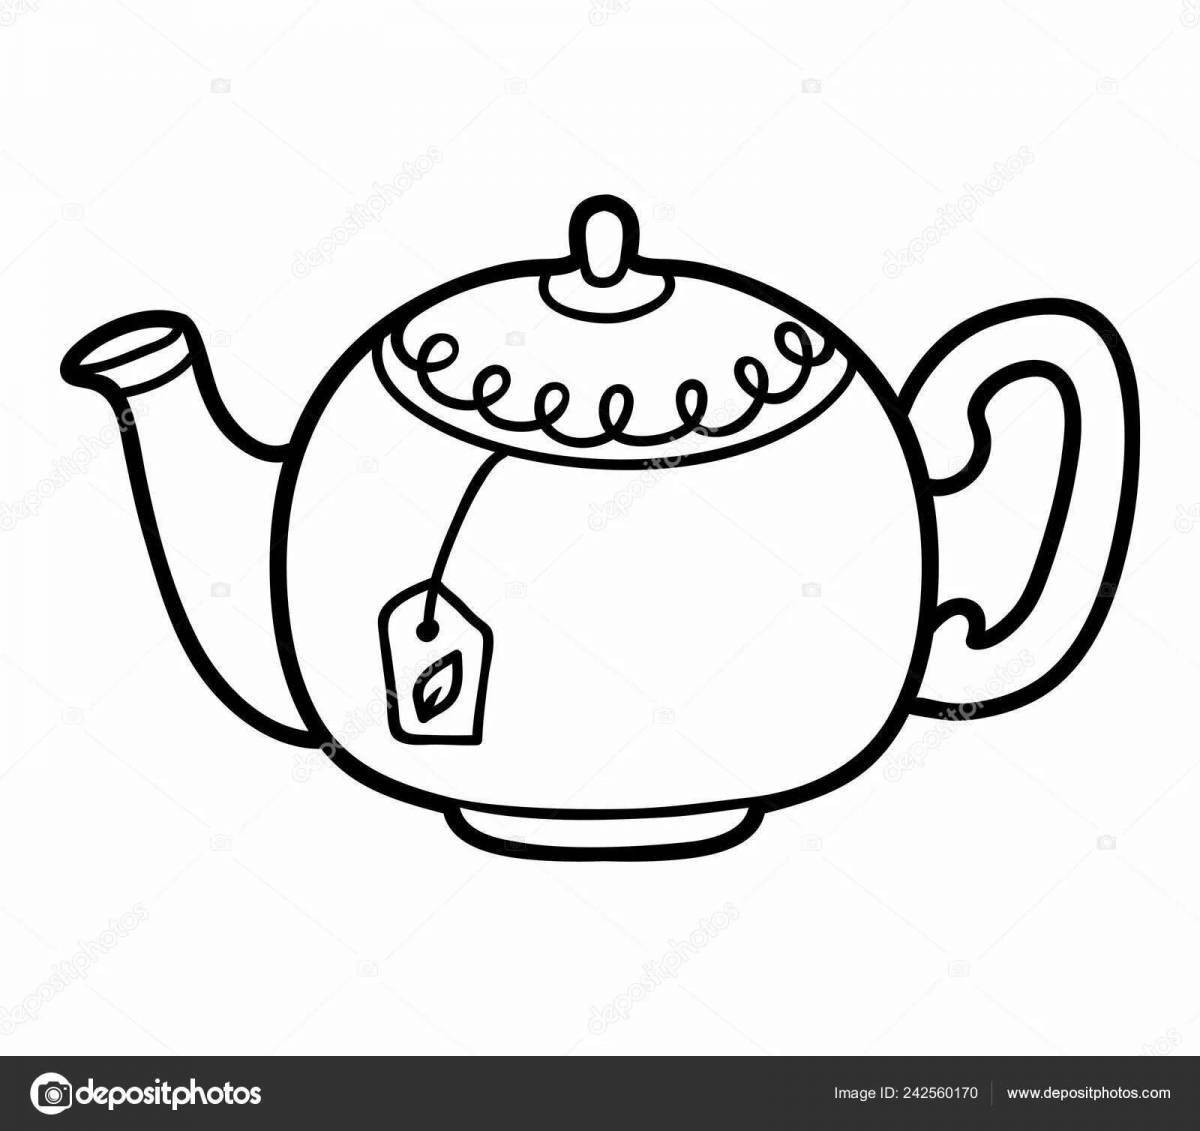 A fun teapot coloring book for preschoolers 3-4 years old